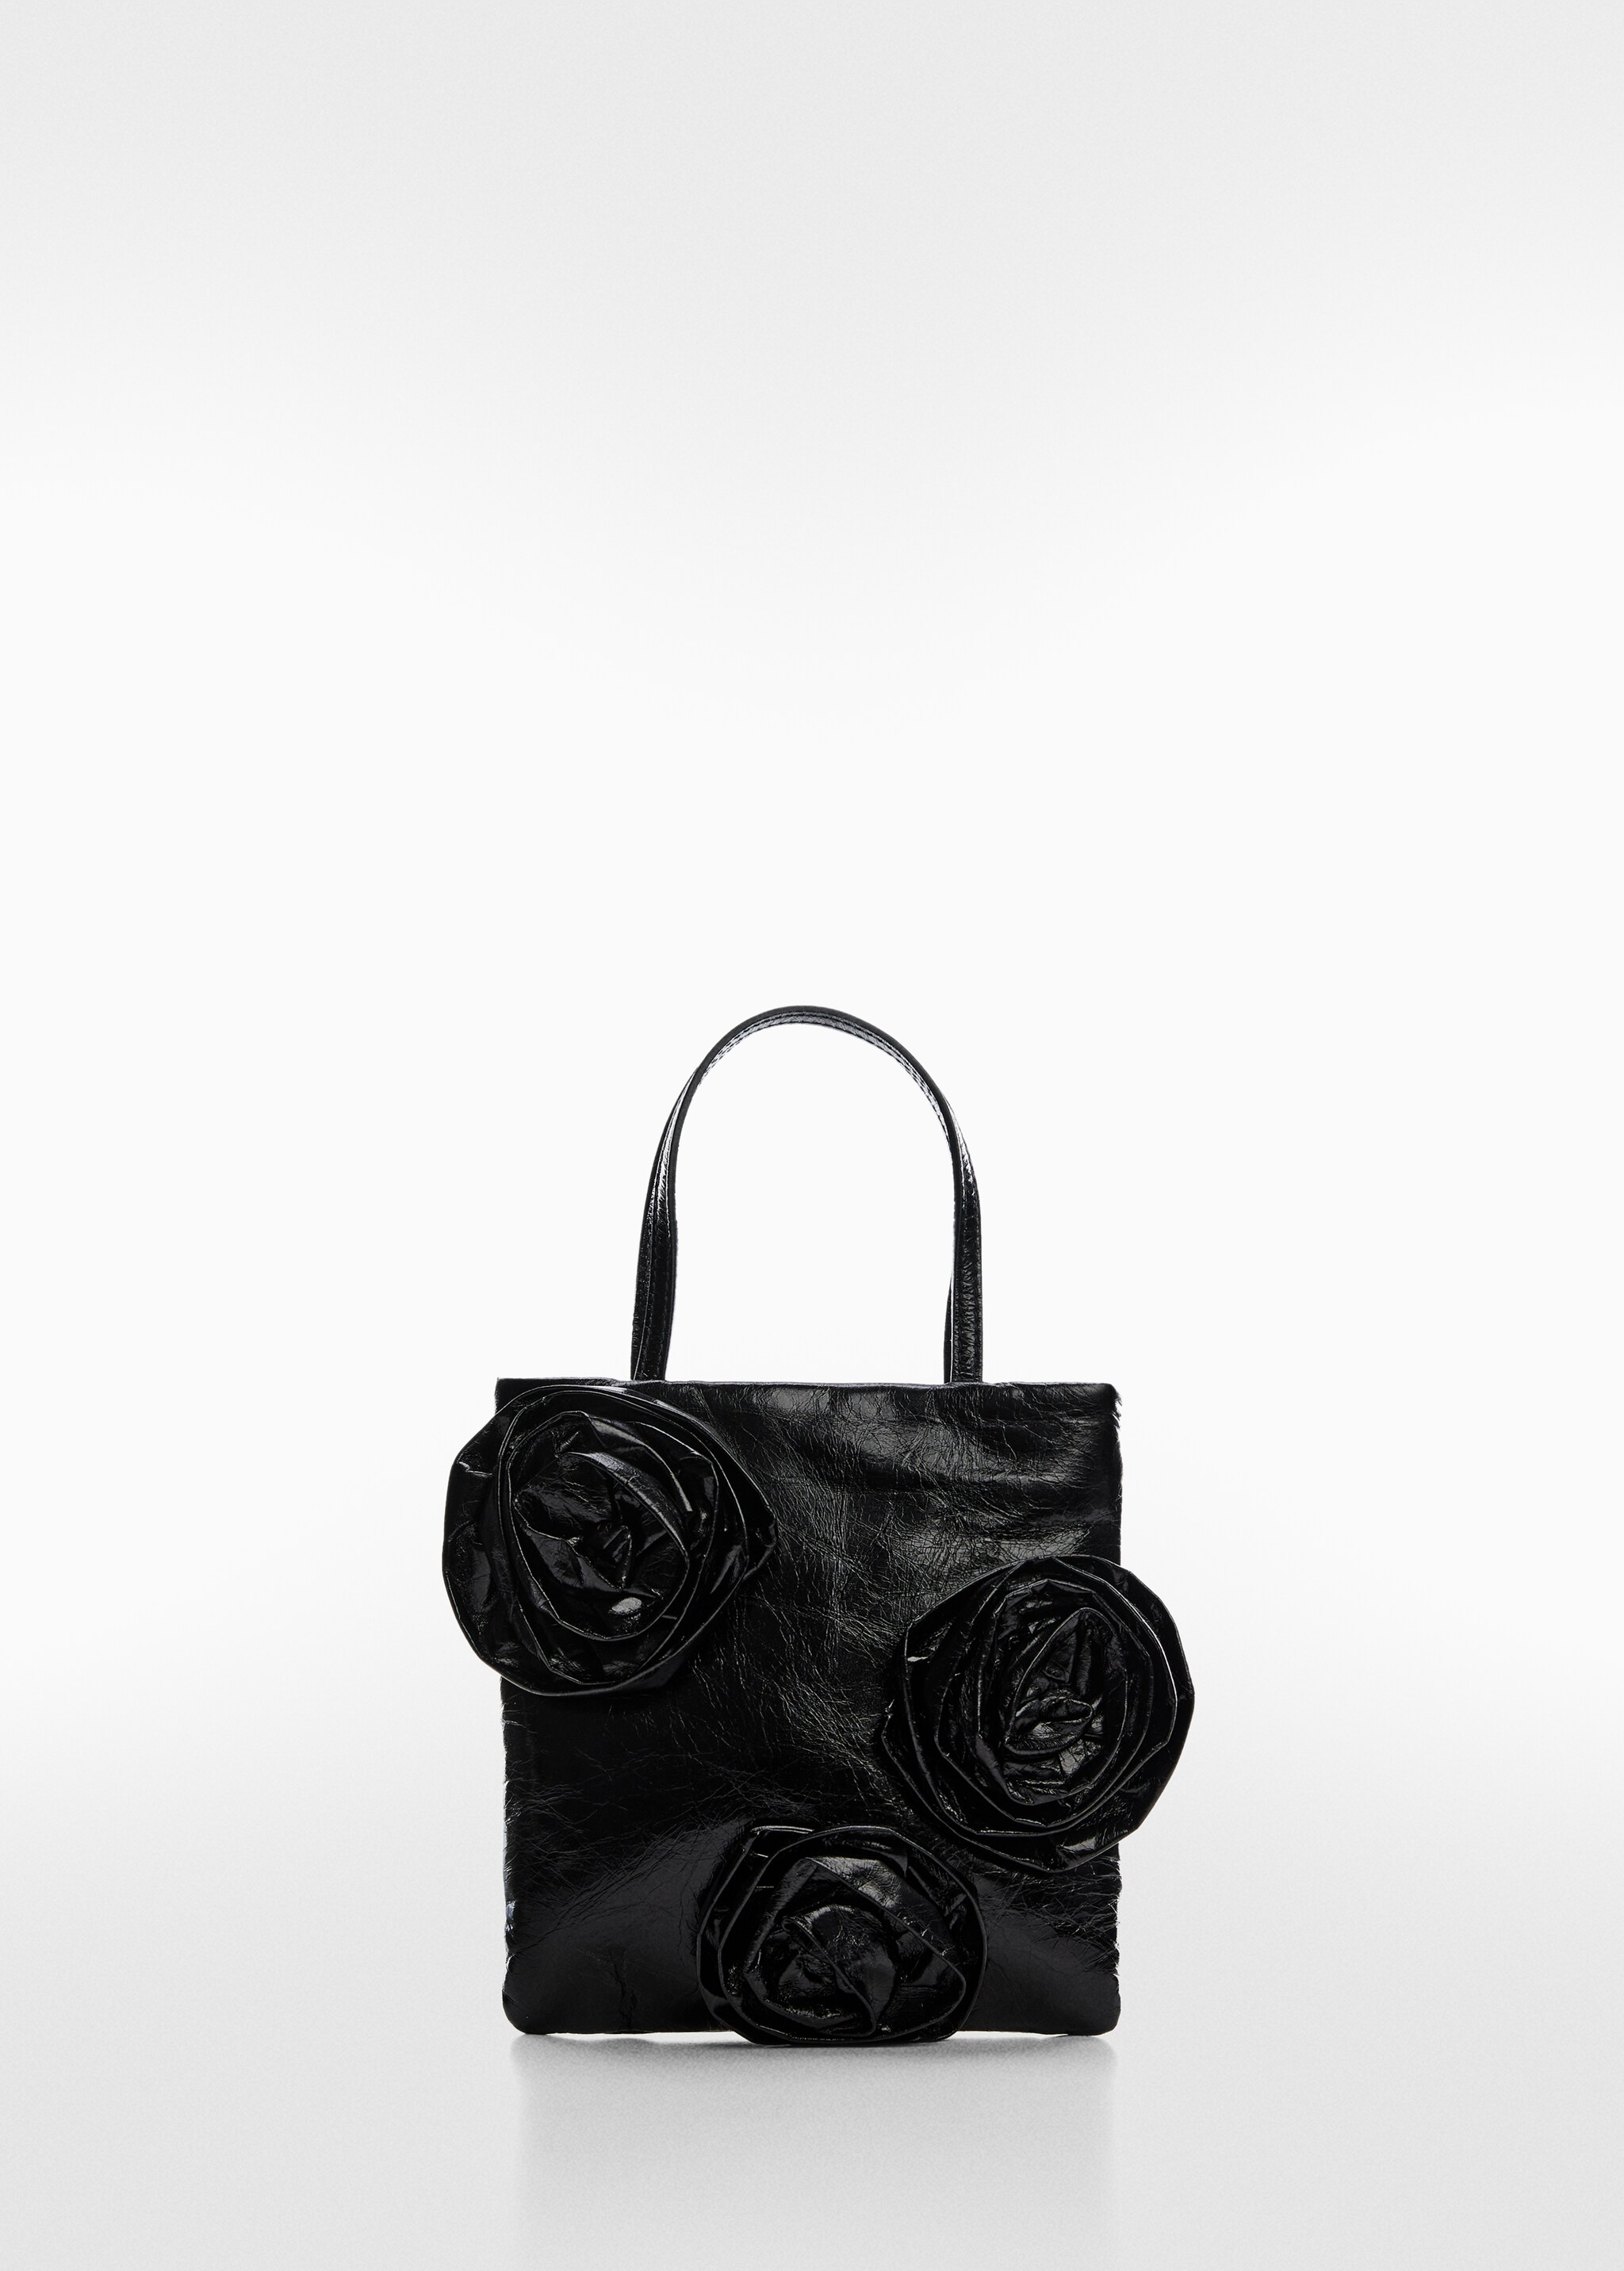 Maxi-flower leather bag - Article without model